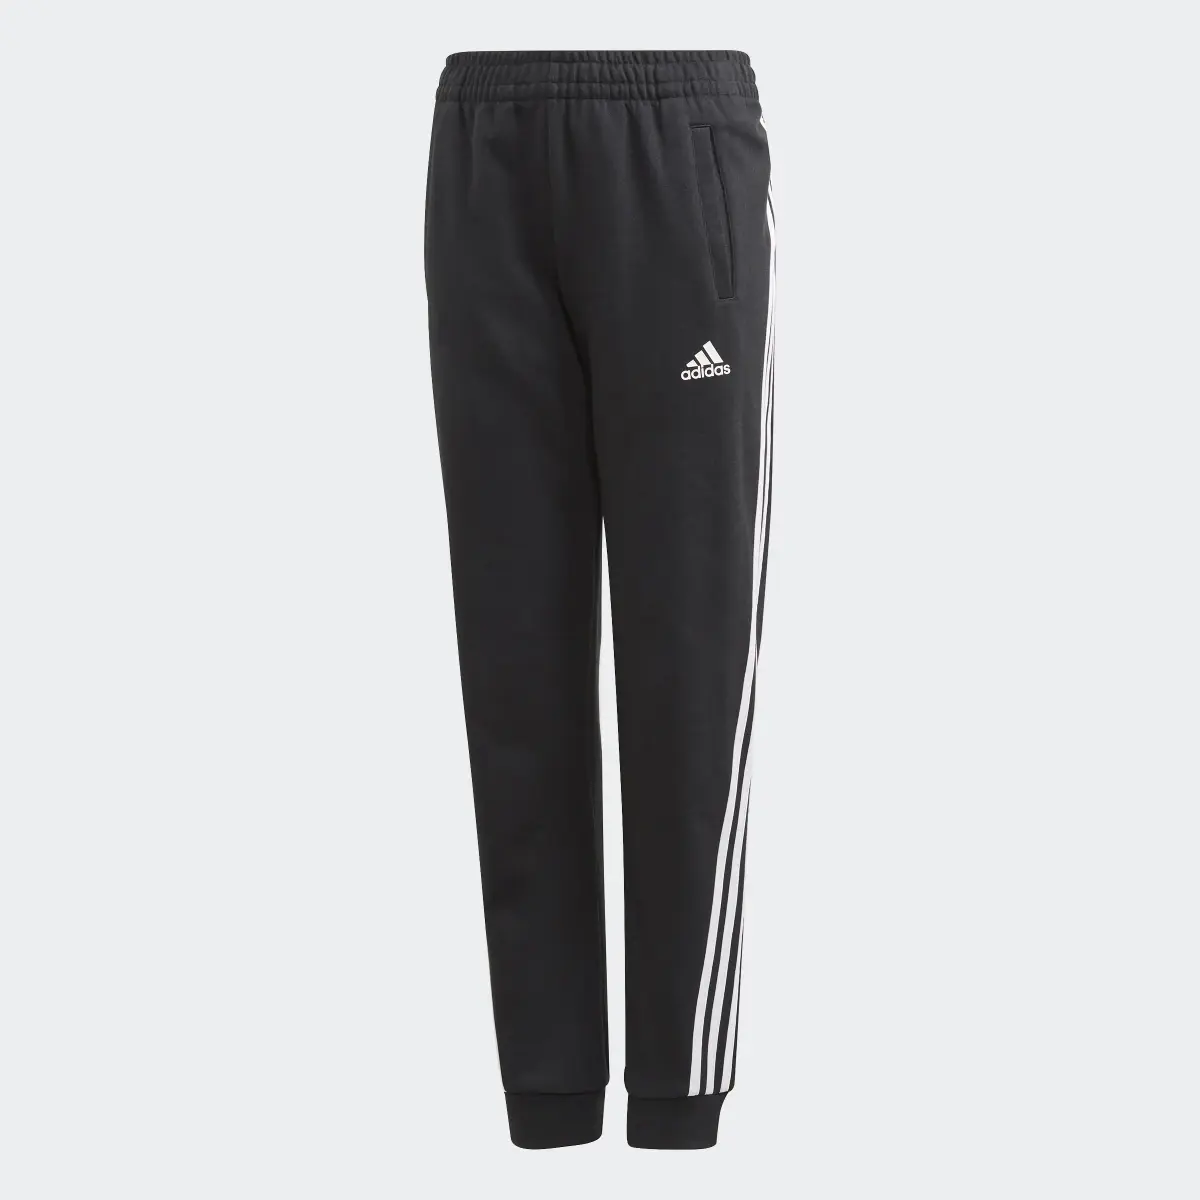 Adidas 3-Stripes Tapered Leg Tracksuit Bottoms. 1